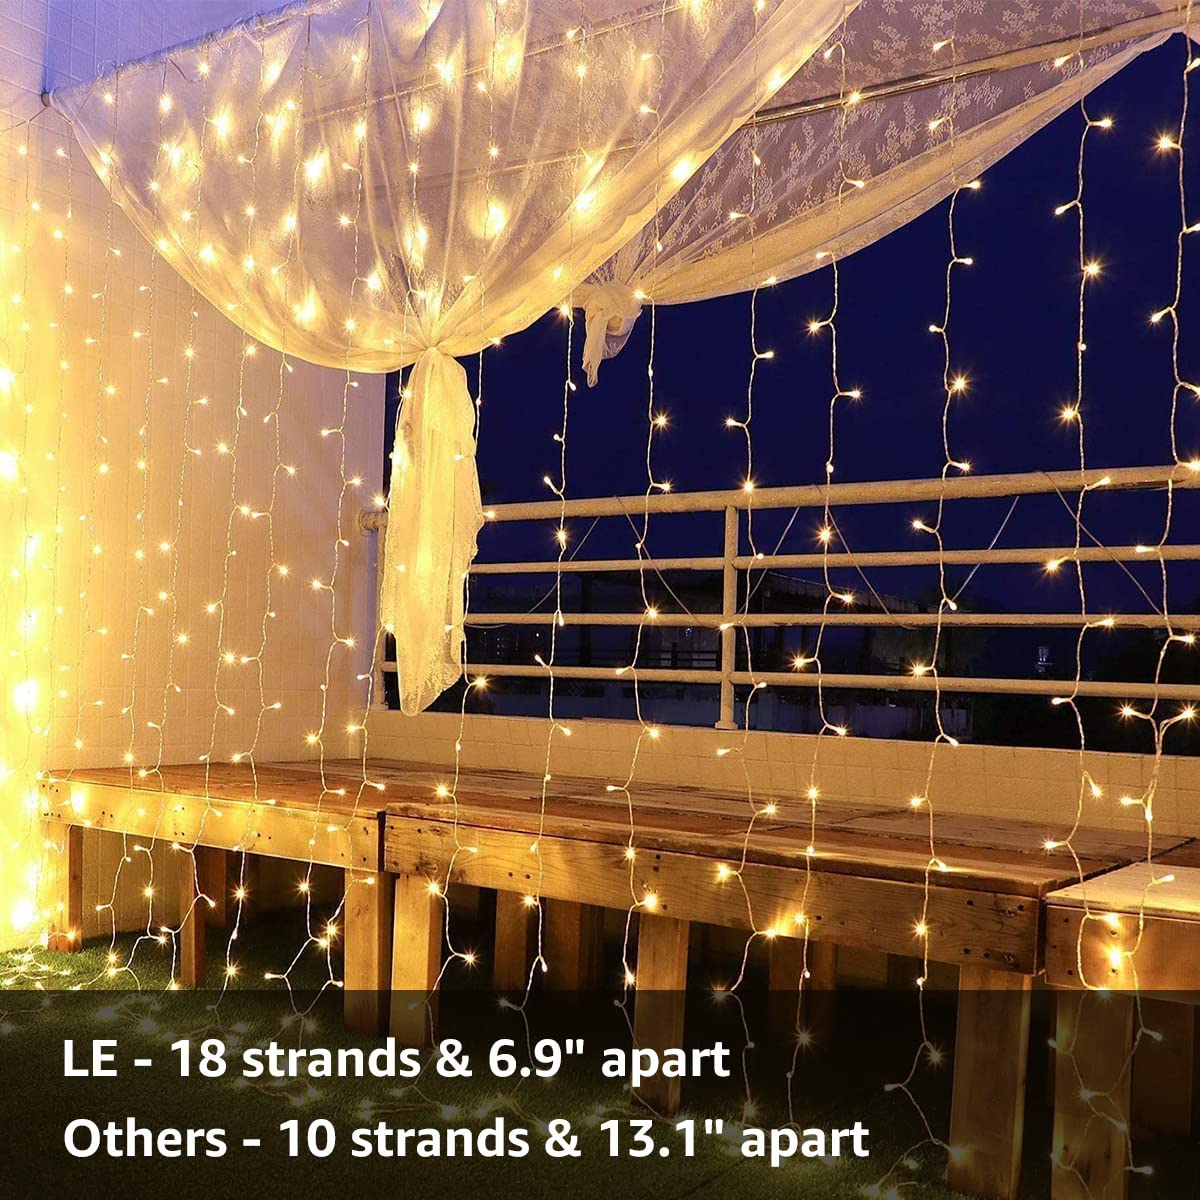 Lighting EVER Curtain Lights, 306 LED 10×10 ft High Density Plug in Window Hanging Fairy String Lights for Wedding Party Backdrop Gazebo, Twinkle Lights for Bedroom Wall (18 Strings, 6.9